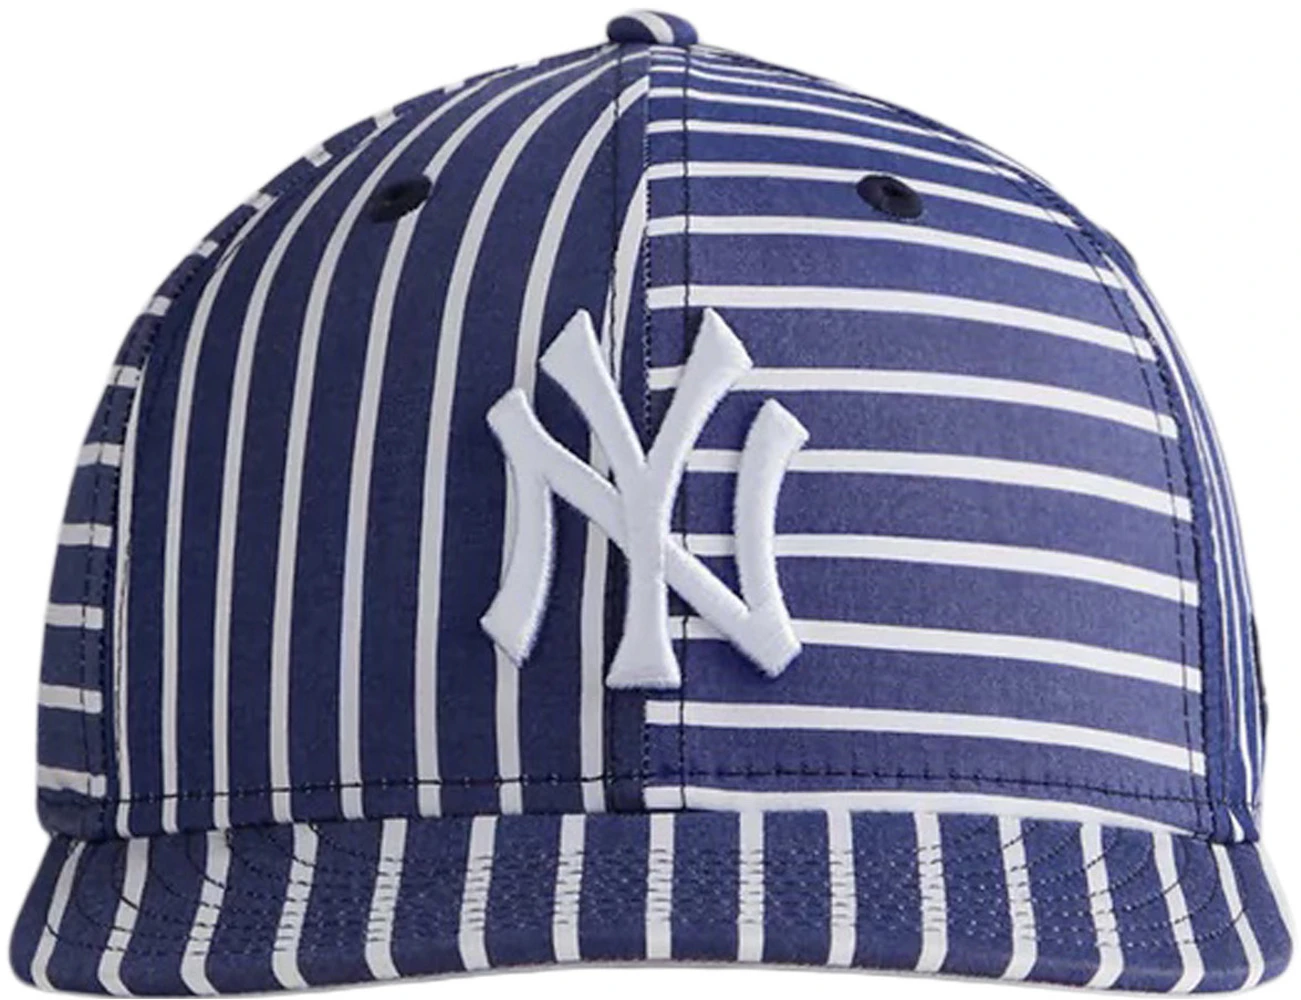 New Era Men's New York Yankees 59Fifty Game Navy Low Crown Authentic Hat